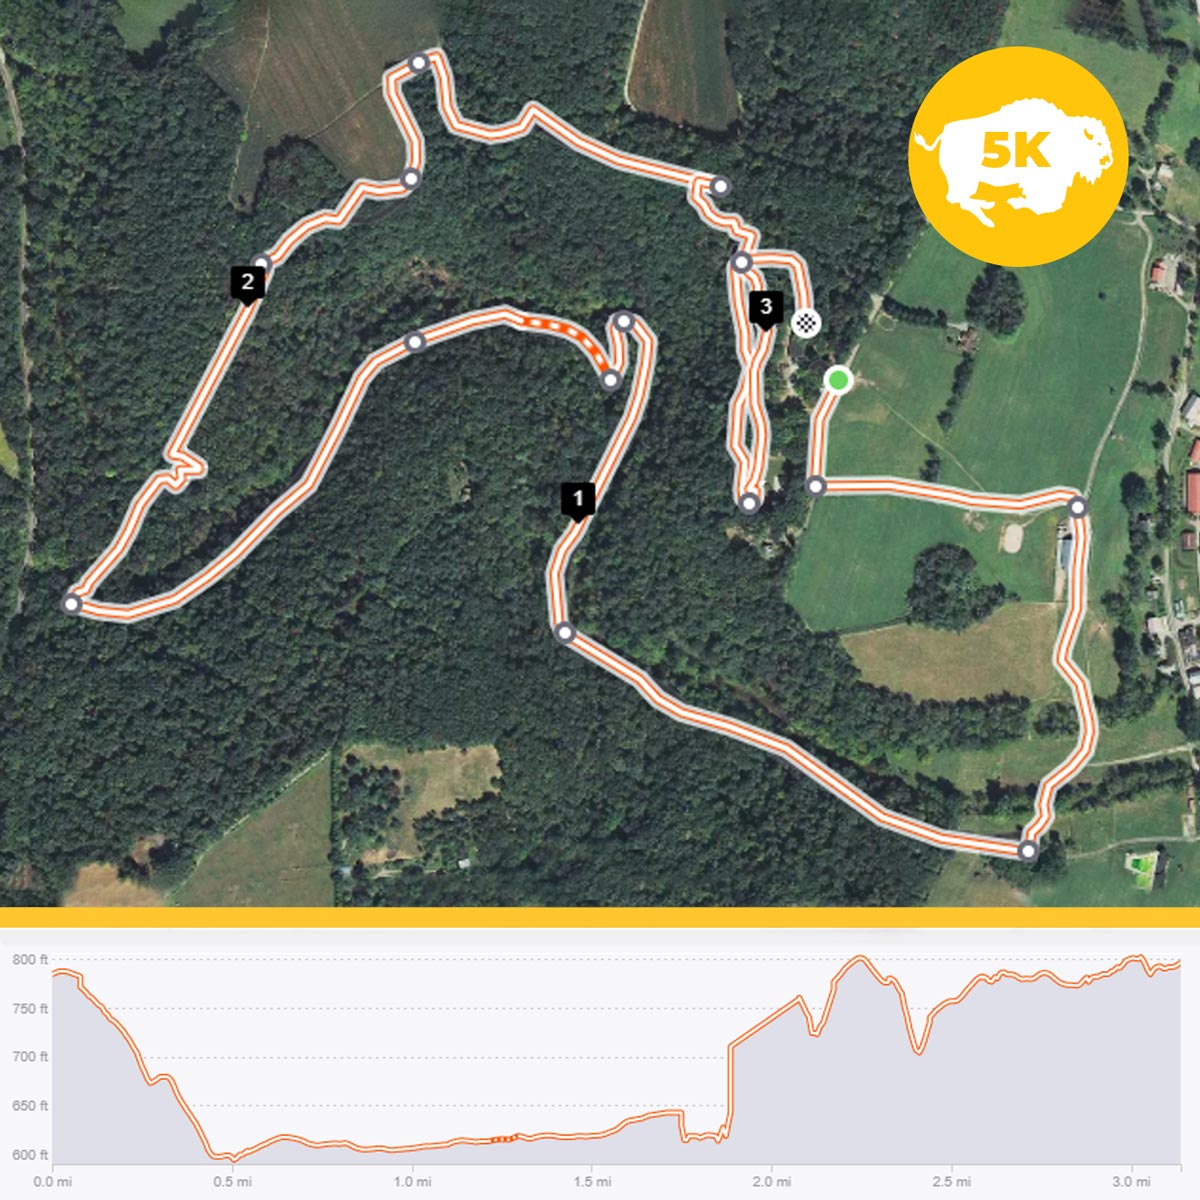 5K Trail Course Map including elevation changes